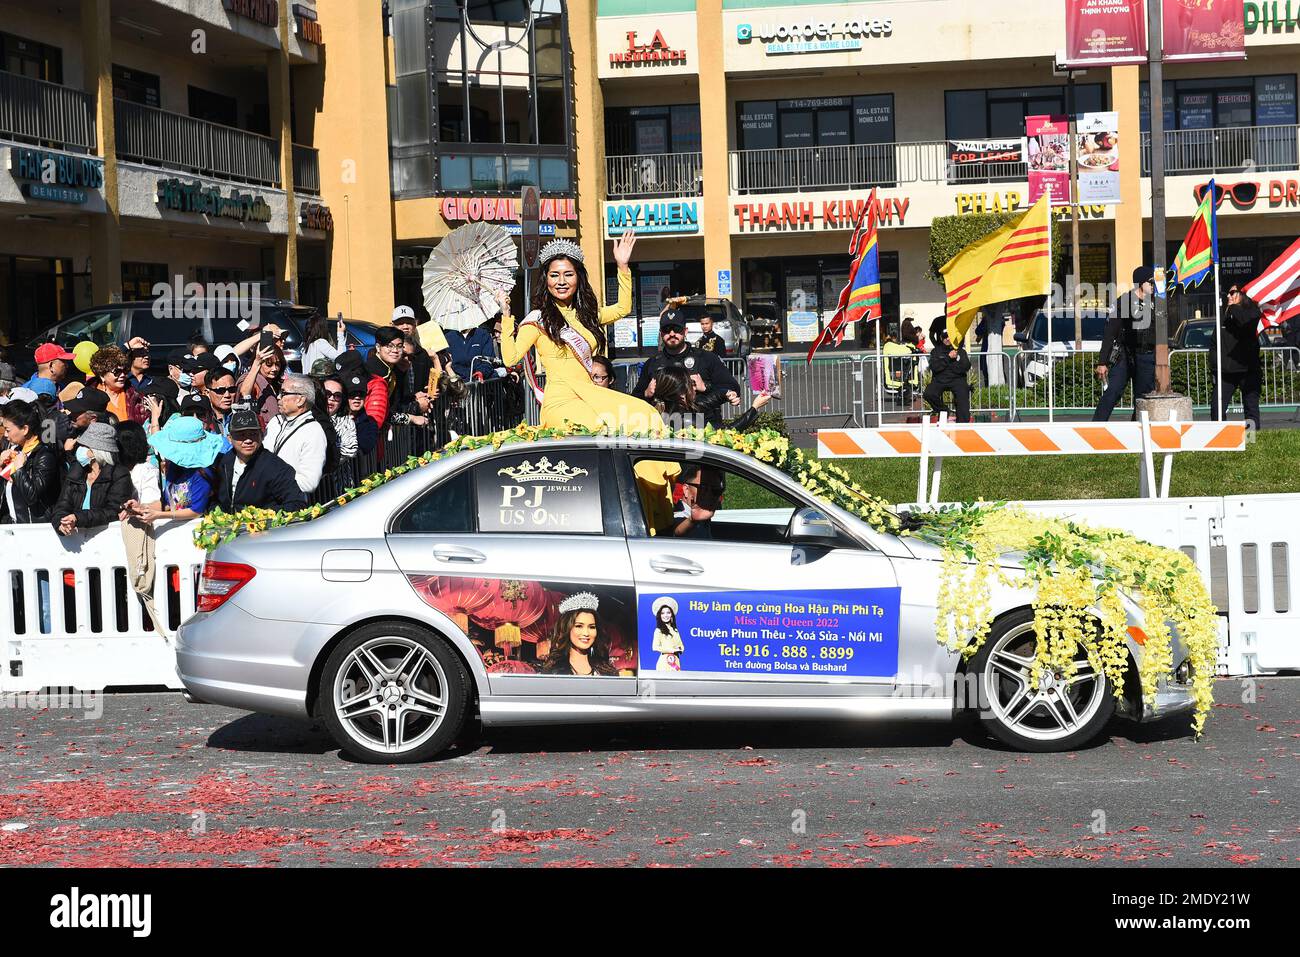 WESTMINSTER, CALIFORNIA - 22 JAN 2023: The 2022 Miss Nail Queen ride satop a vehicle in the Tet Parade Celebrating the Year of the Cat. Stock Photo